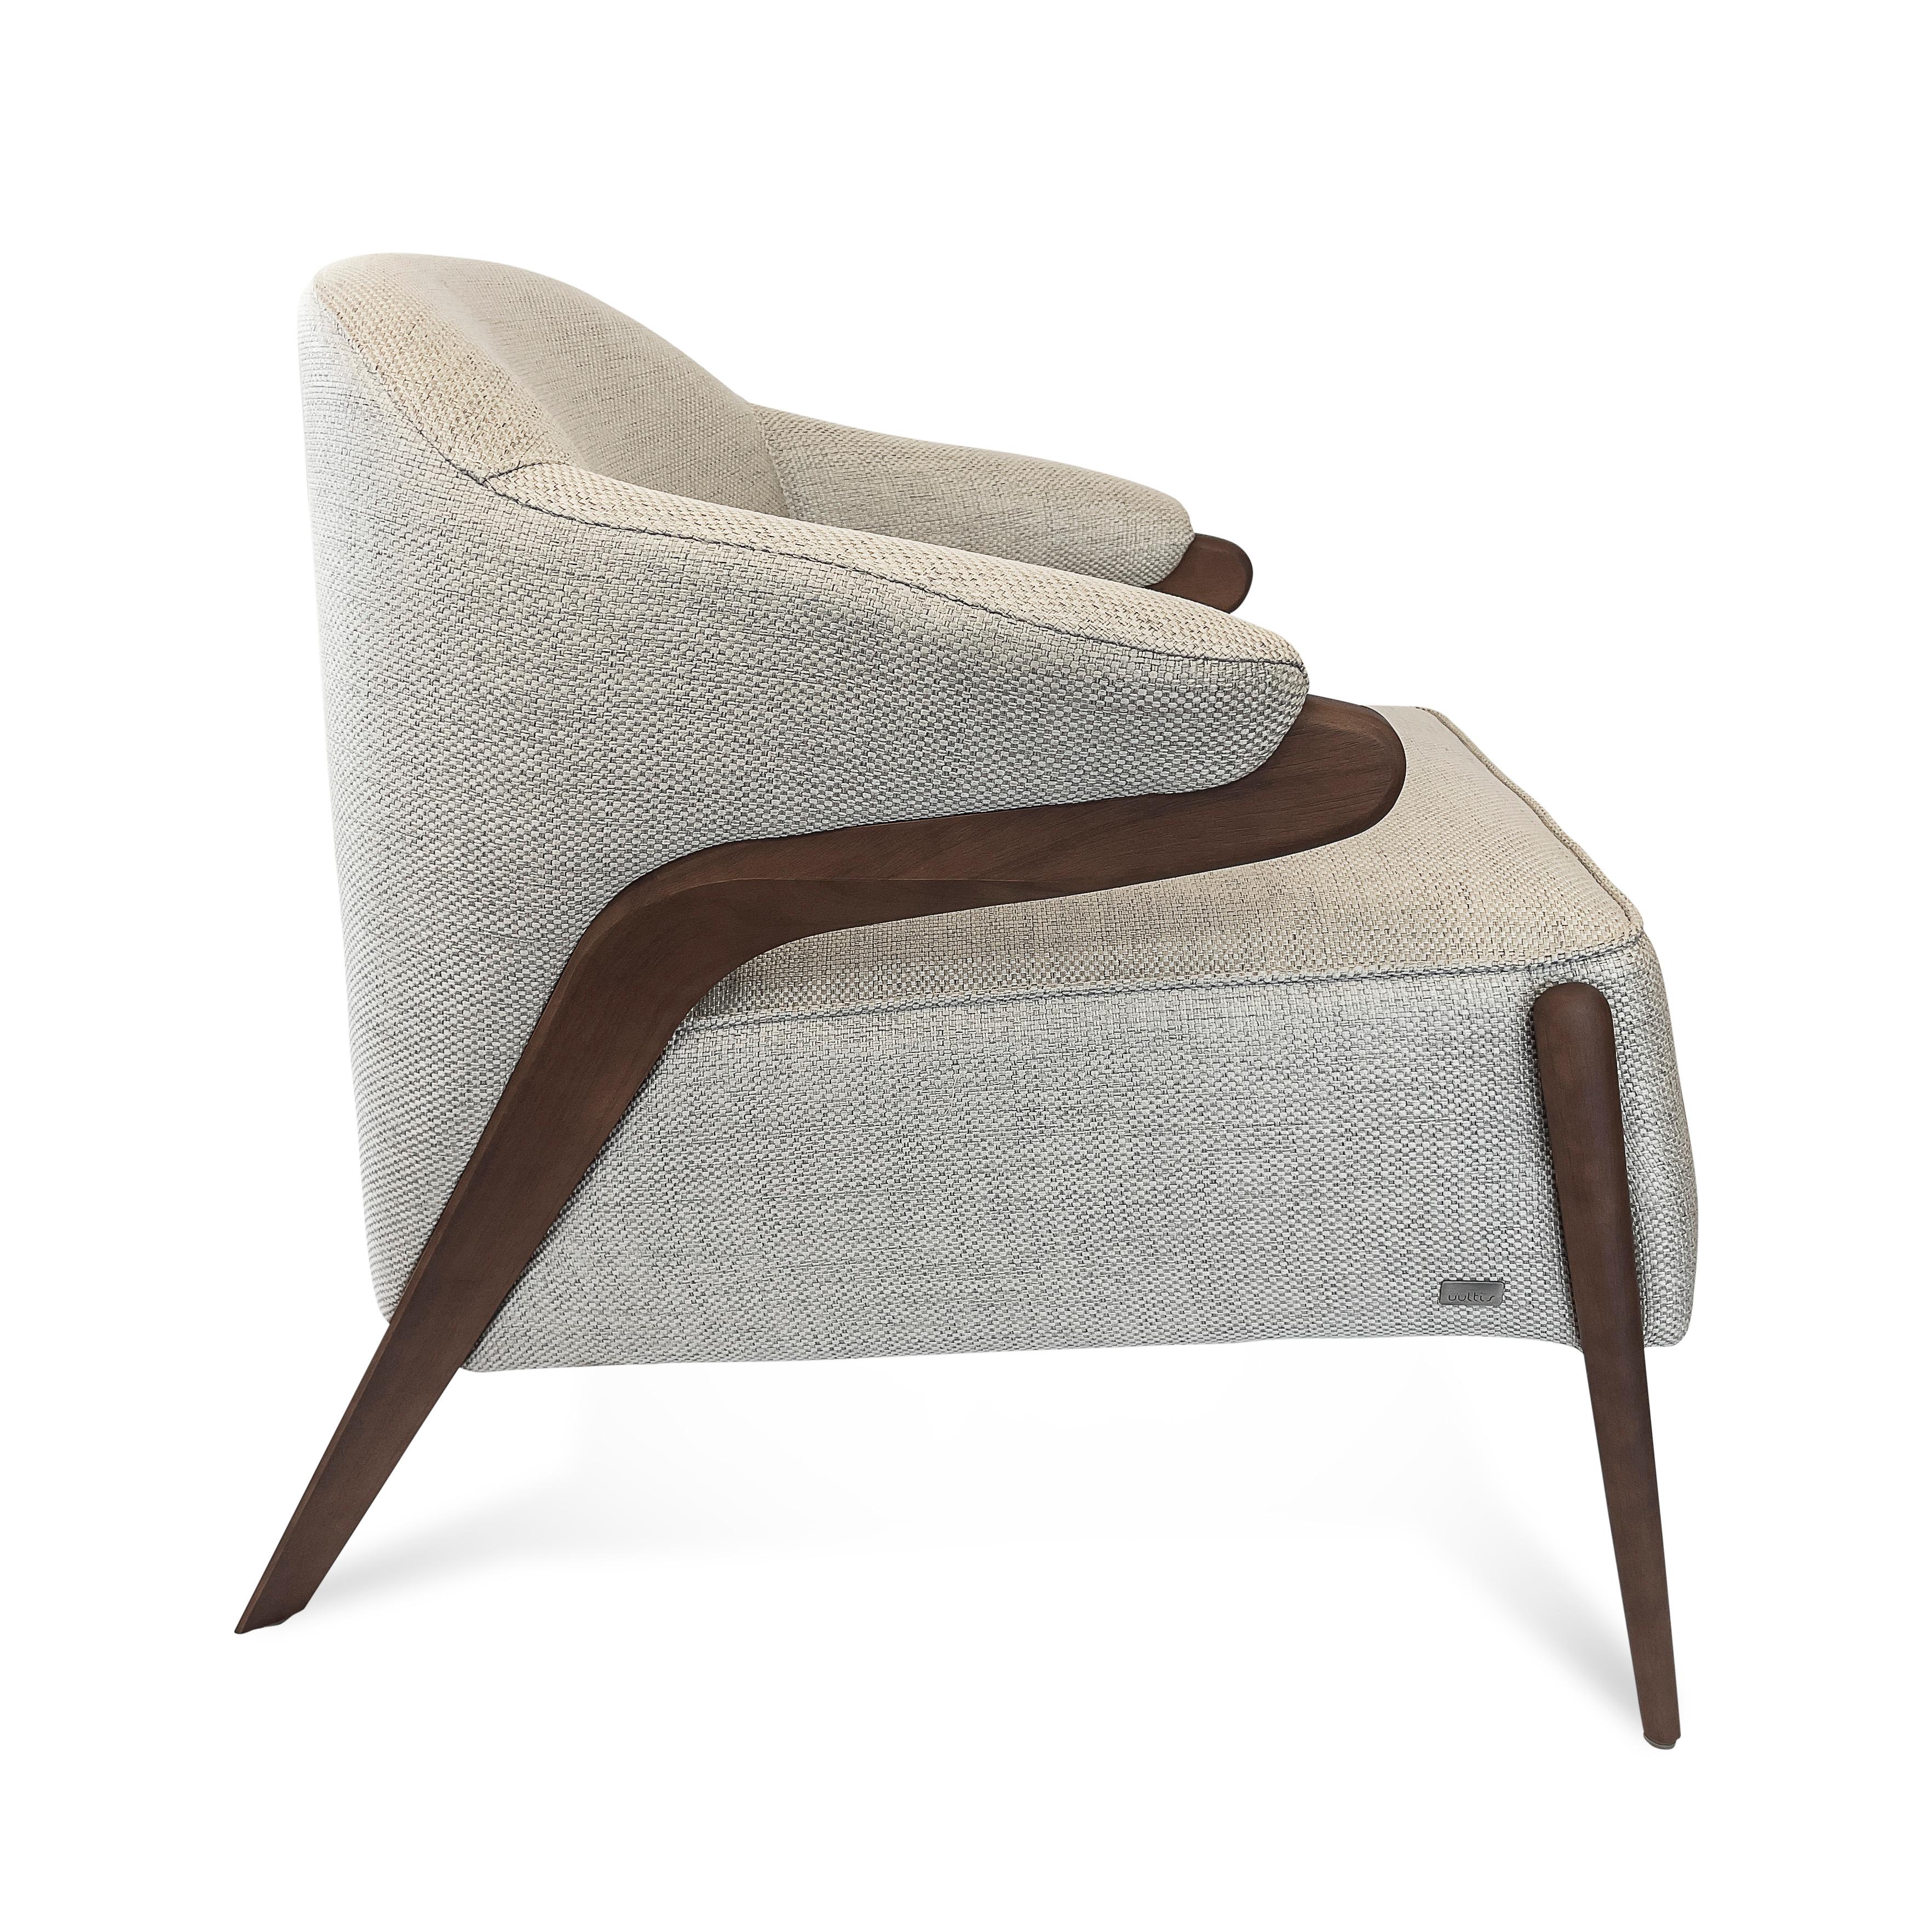 Osa Upholstered Armchair in Walnut Wood Finish Frame and Beige Fabric In New Condition For Sale In Miami, FL